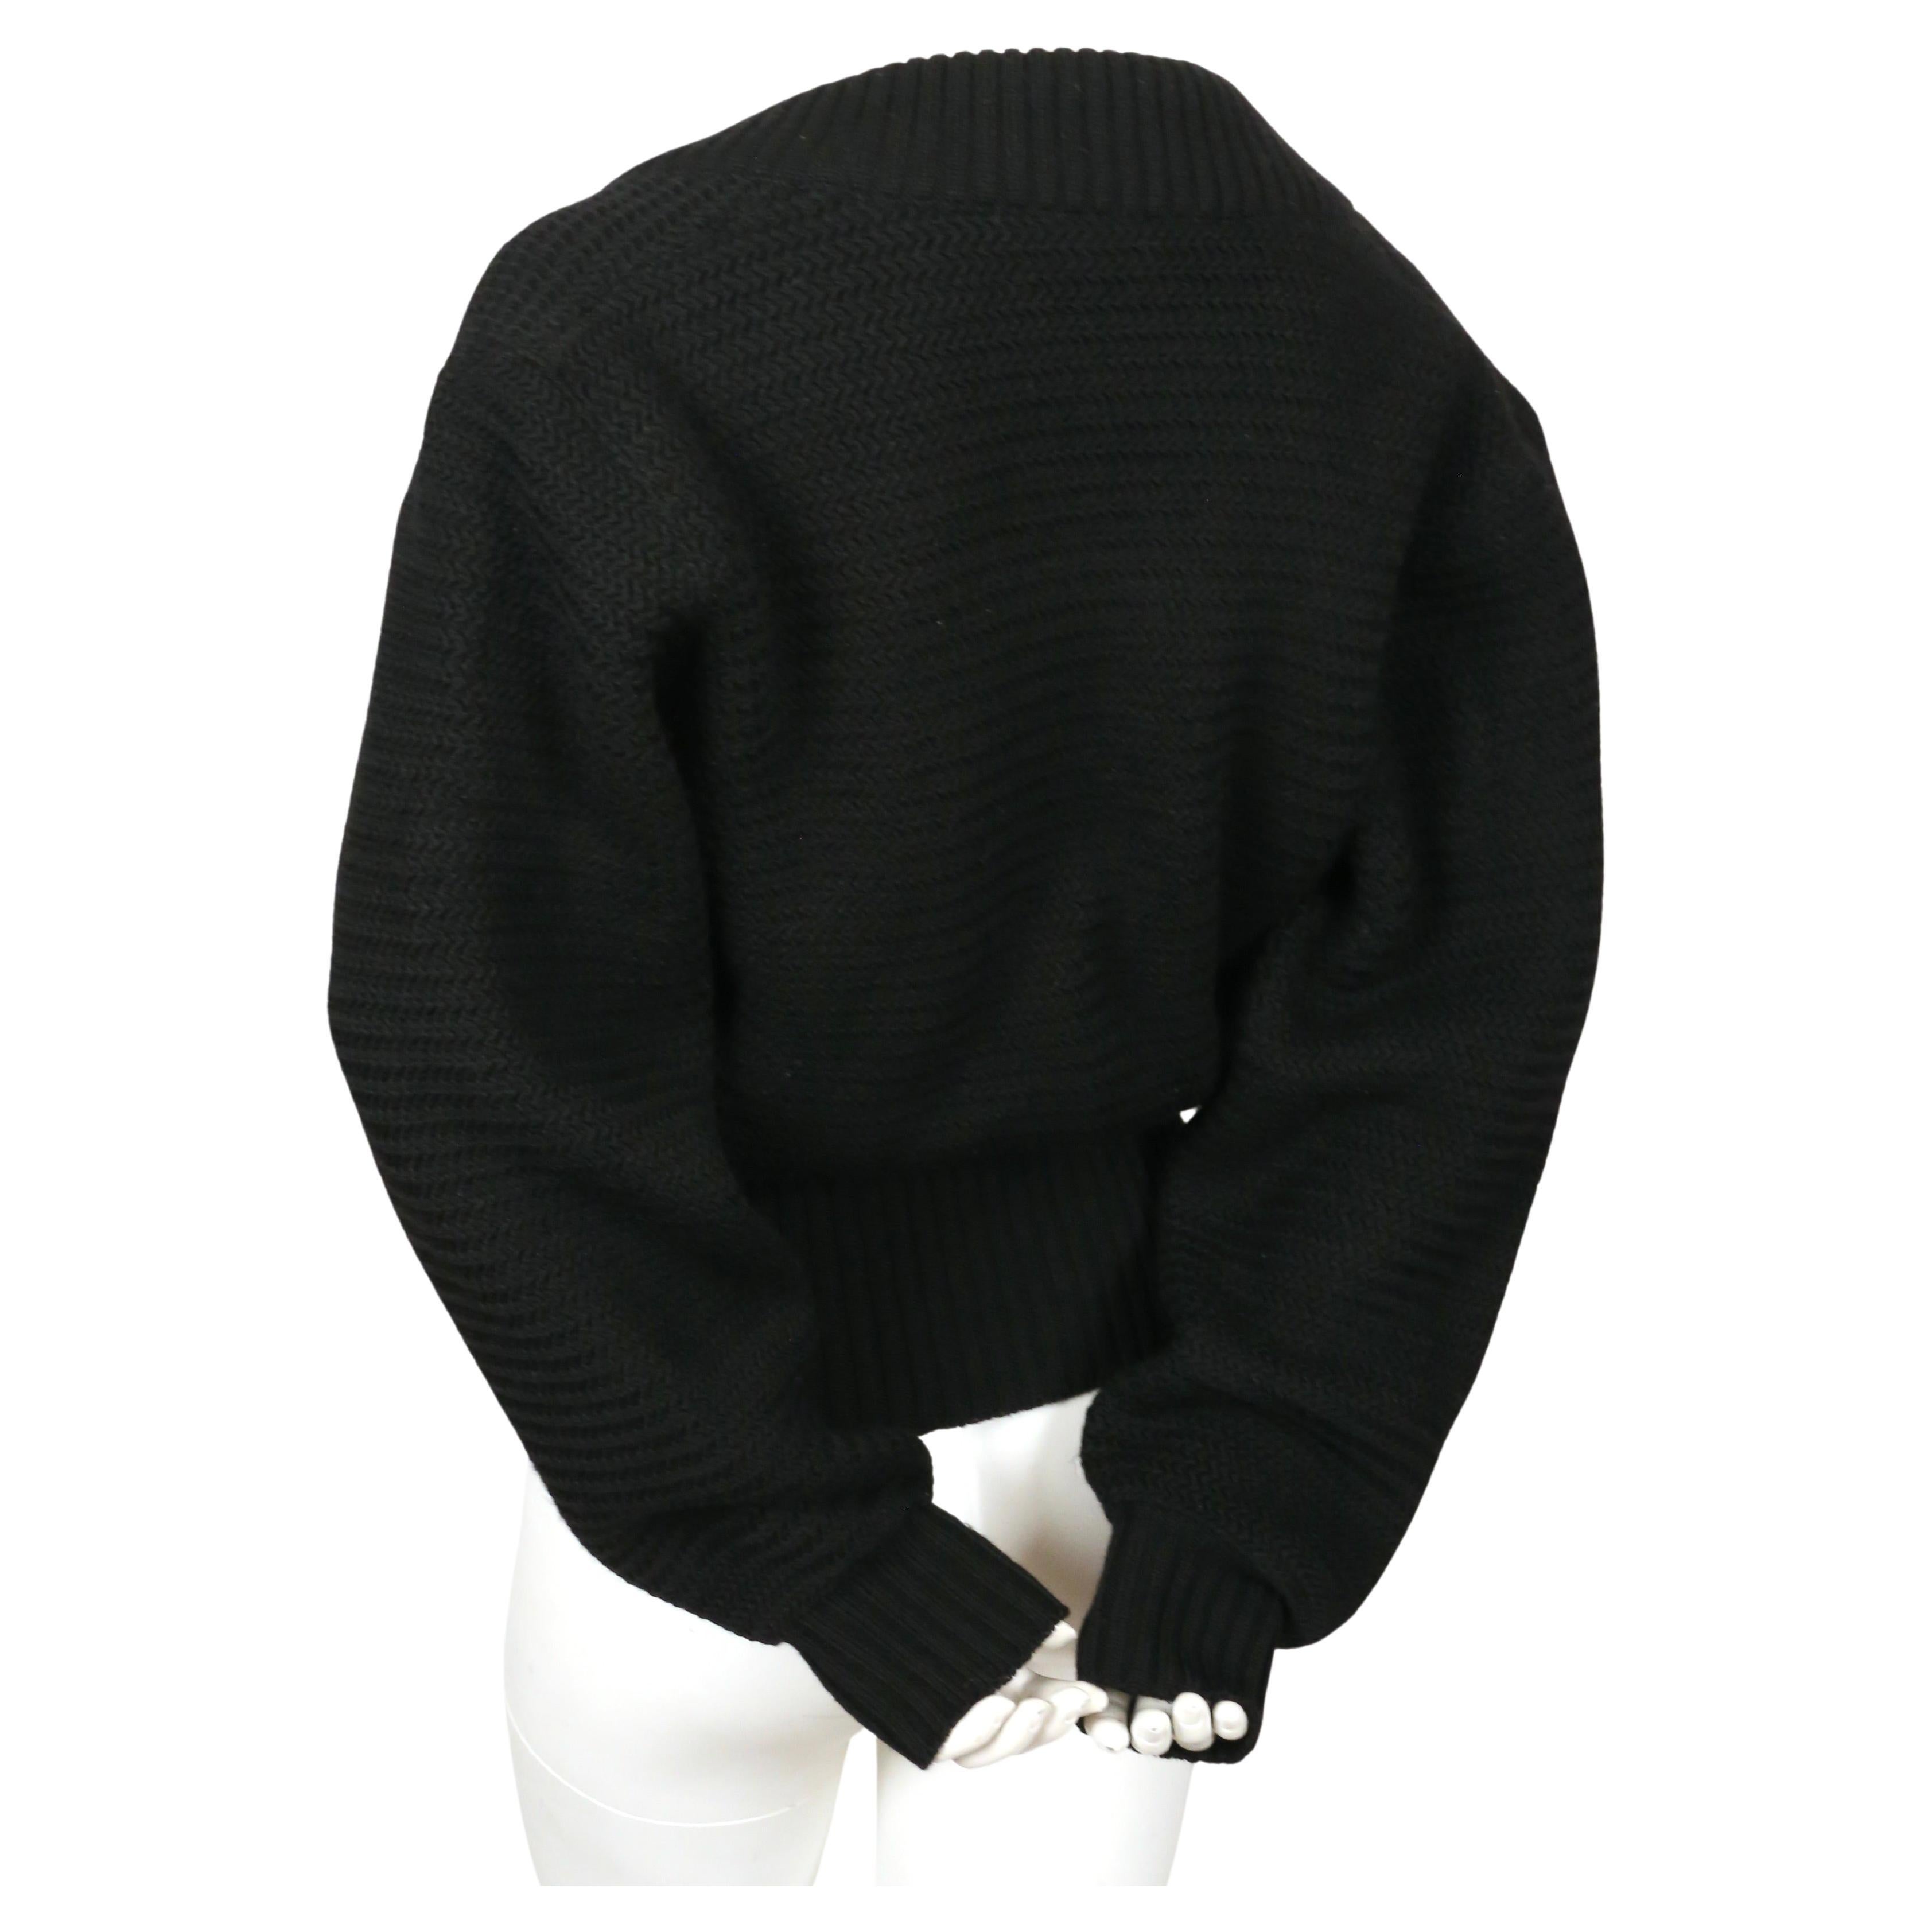 1986 AZZEDINE ALAIA heavy knit black RUNWAY cardigan sweater coat with zippers For Sale 1